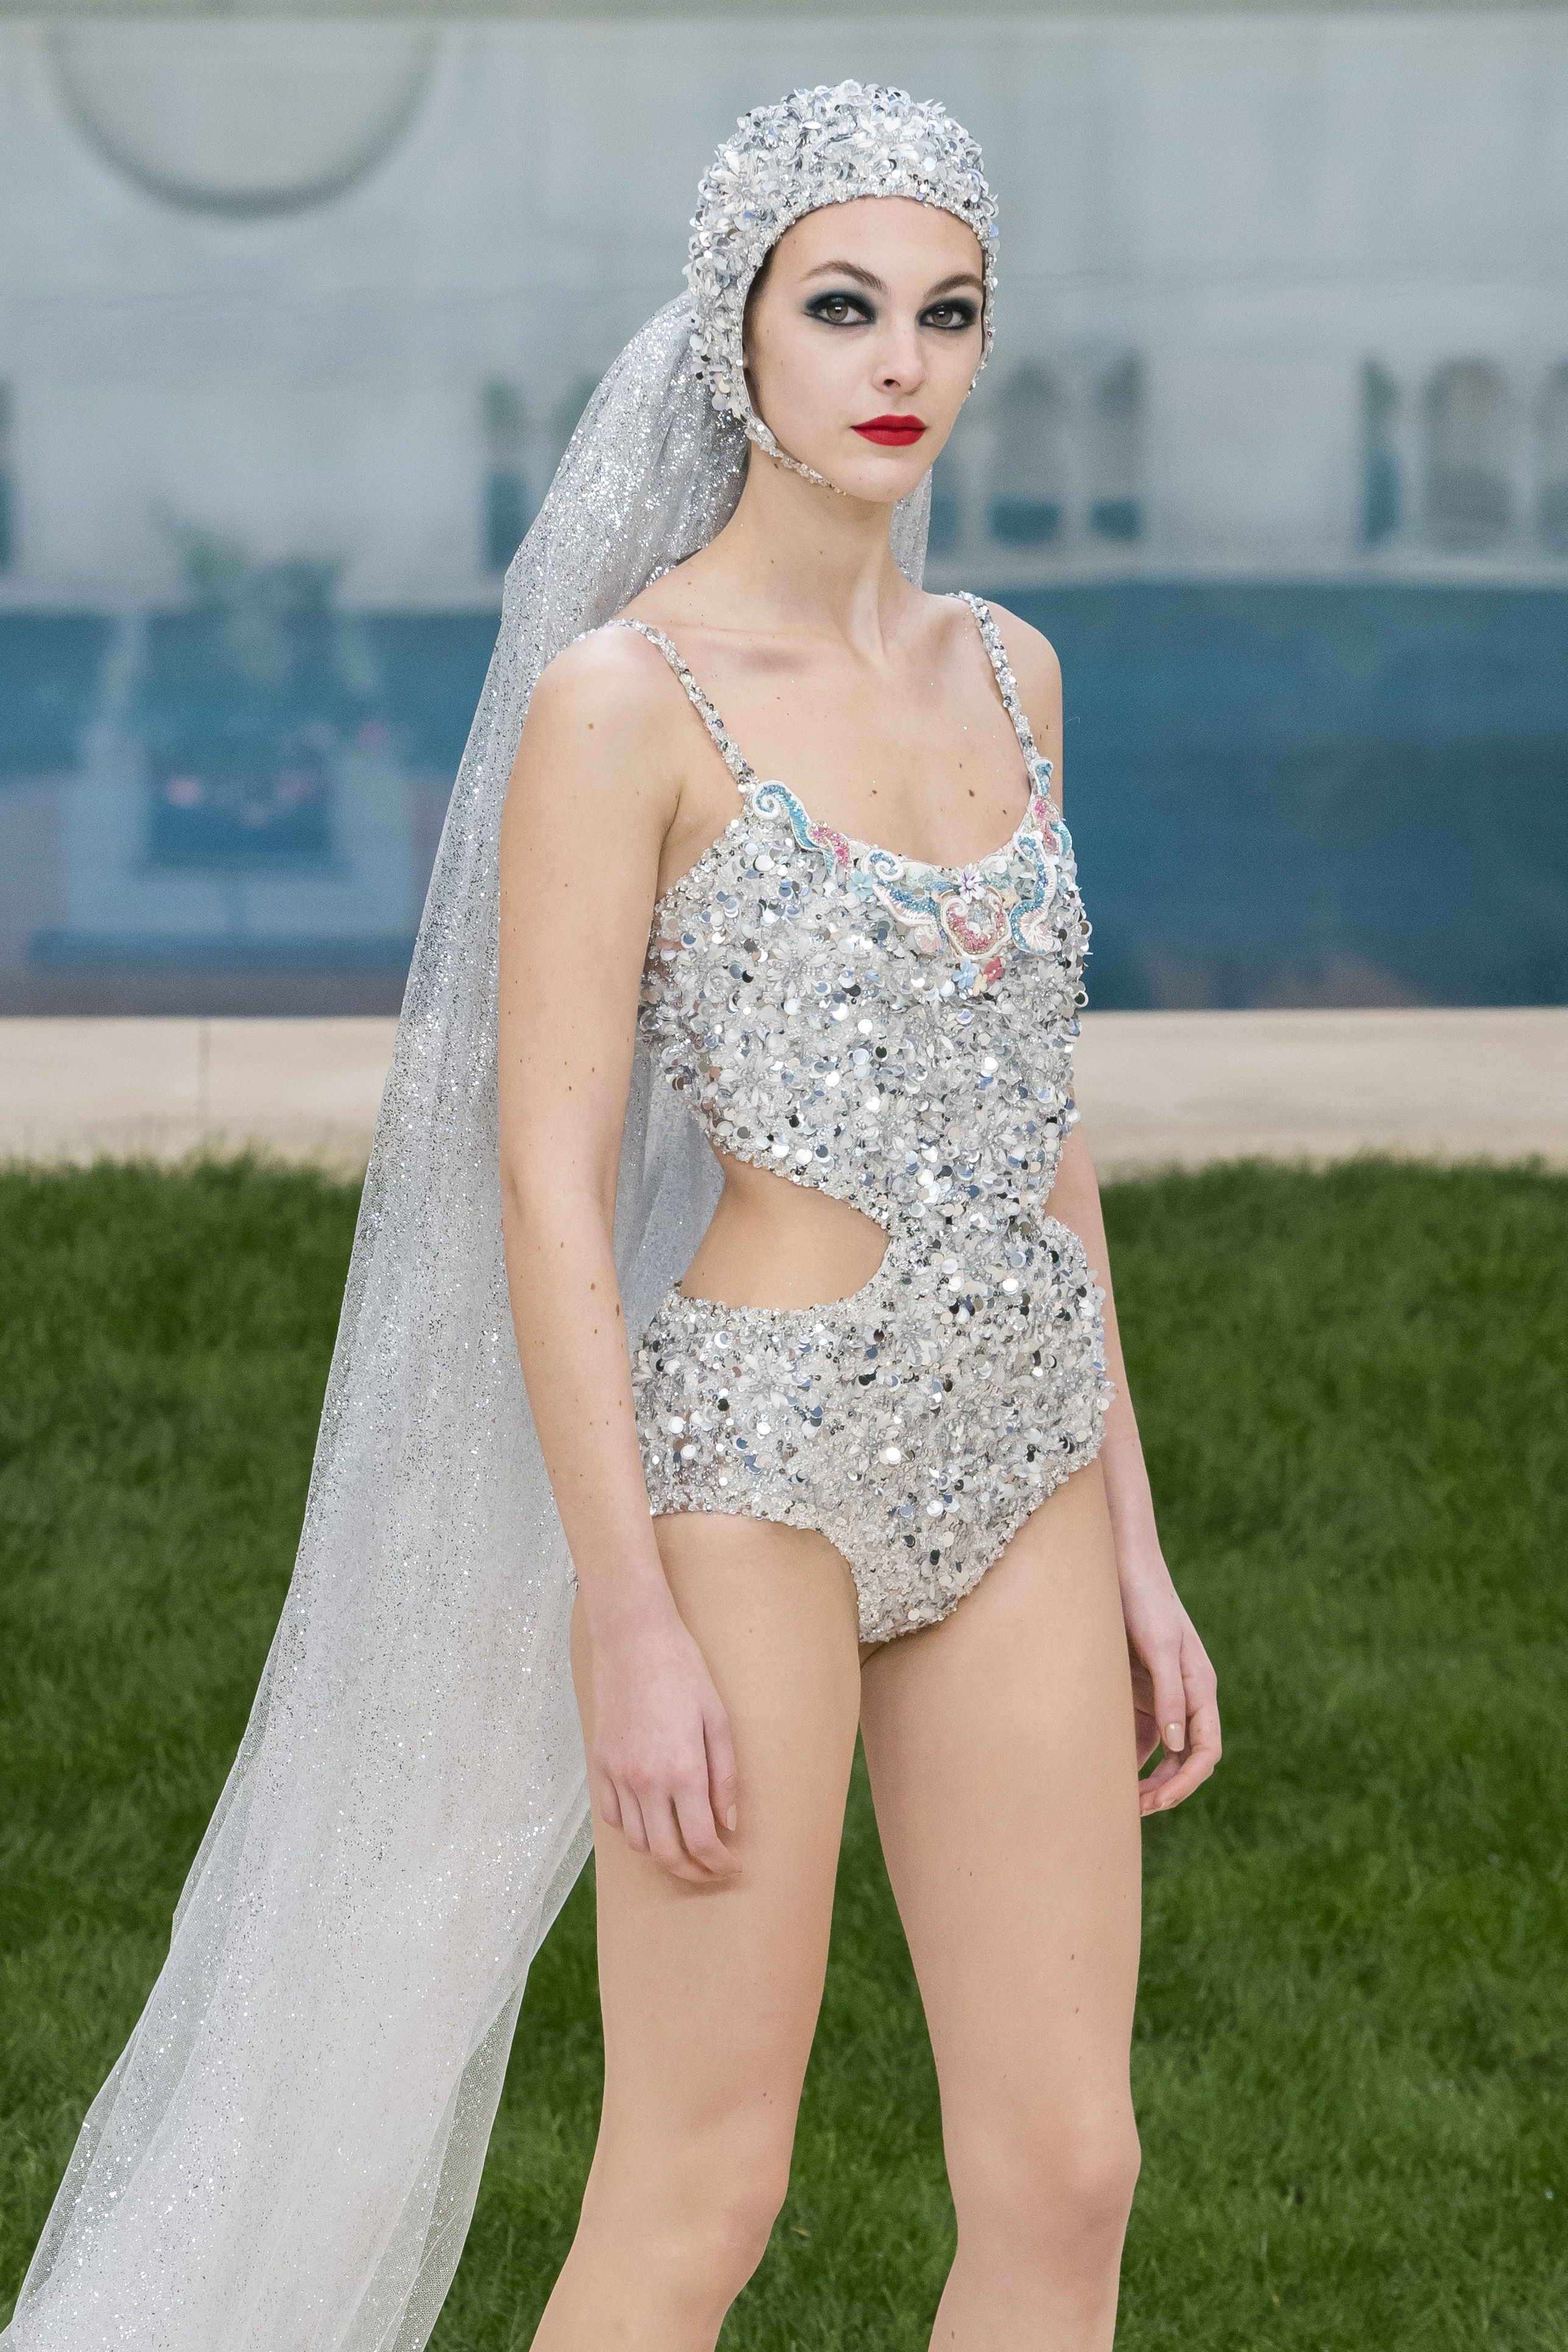 Chanel's Take on The Haute Couture Bride Just Gave Beach Weddings